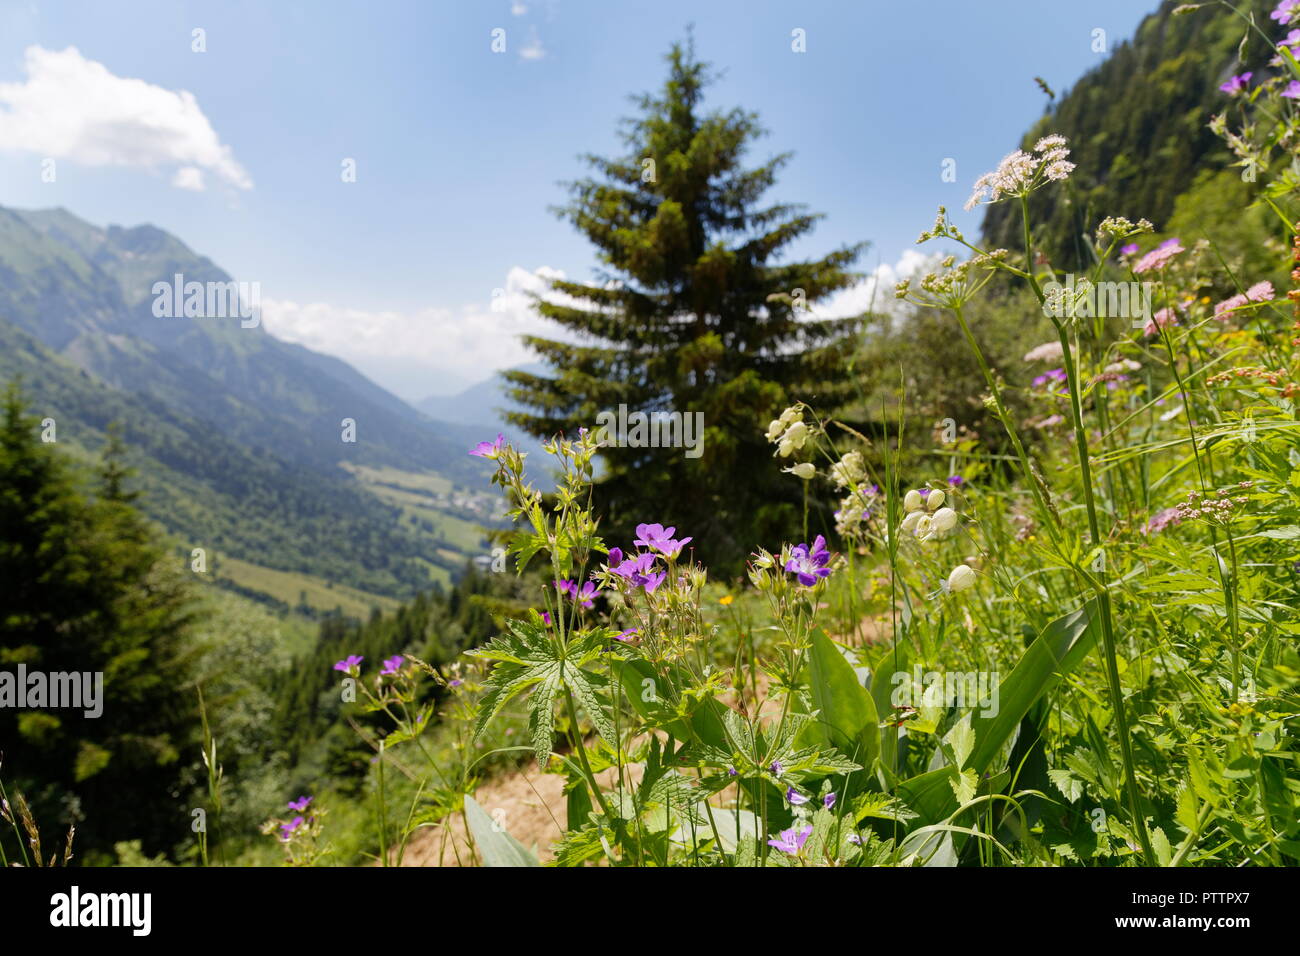 Meadow flowers in full bloom on the side of a footpath trail on the hills around Col de la Forclaz France Stock Photo